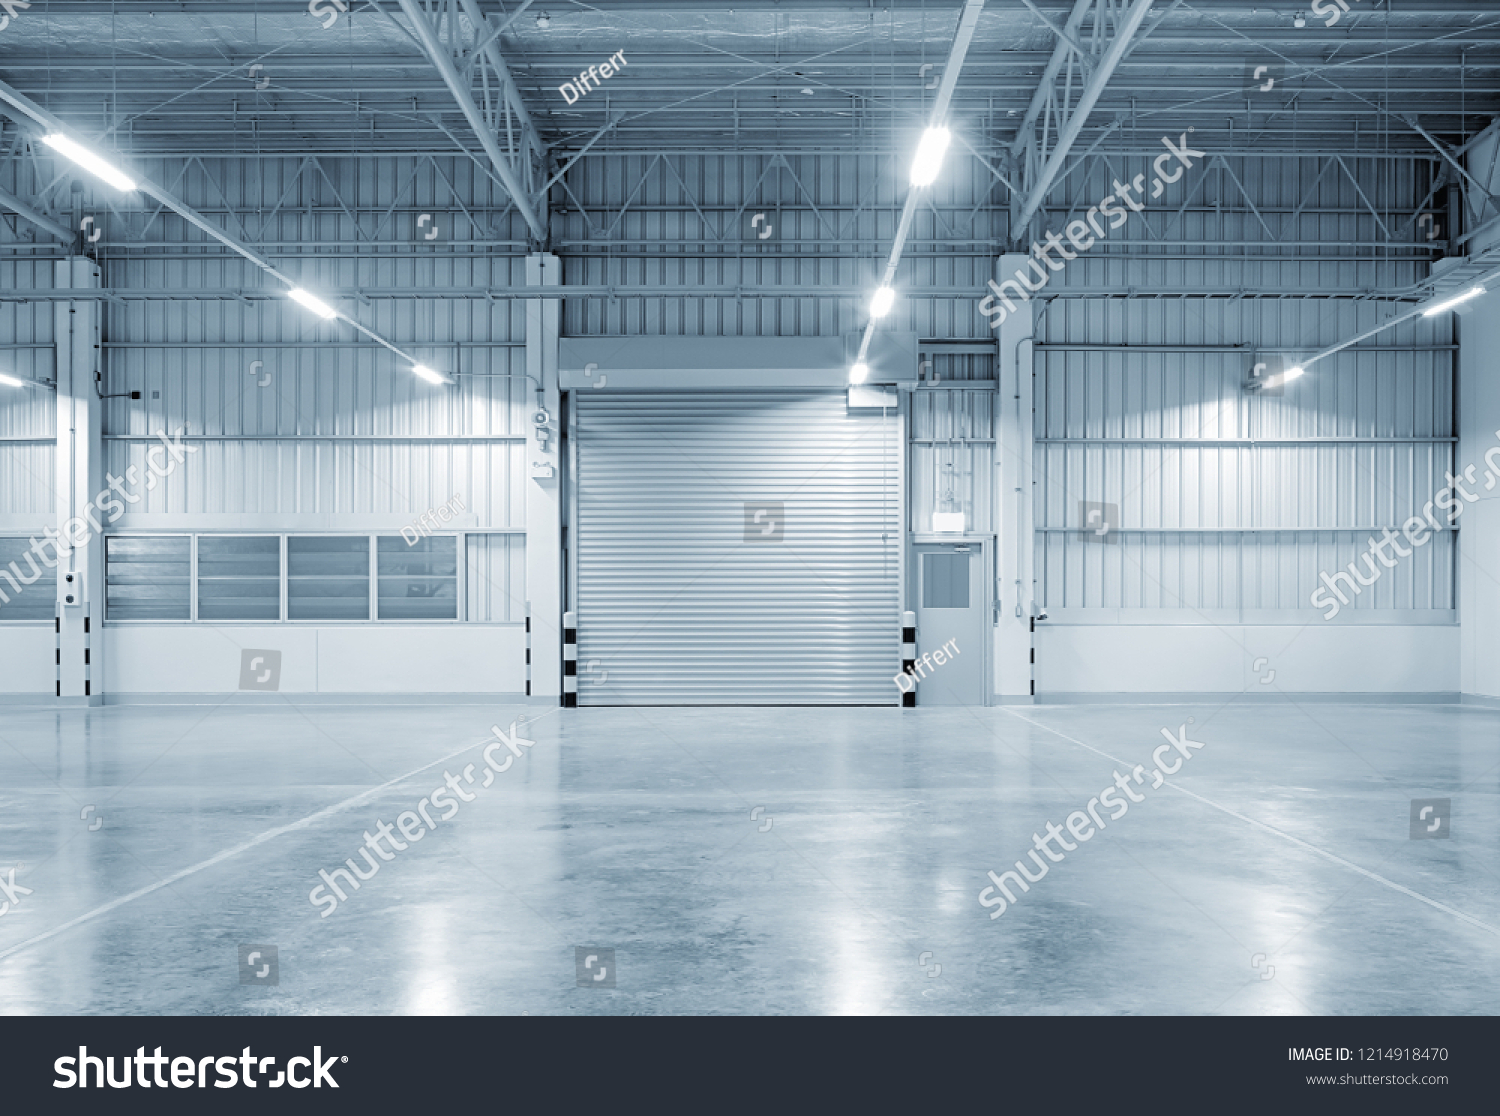 Roller door or roller shutter using for factory, warehouse or hangar. Industrial building interior consist of polished concrete floor and closed door for product display or industry background. #1214918470